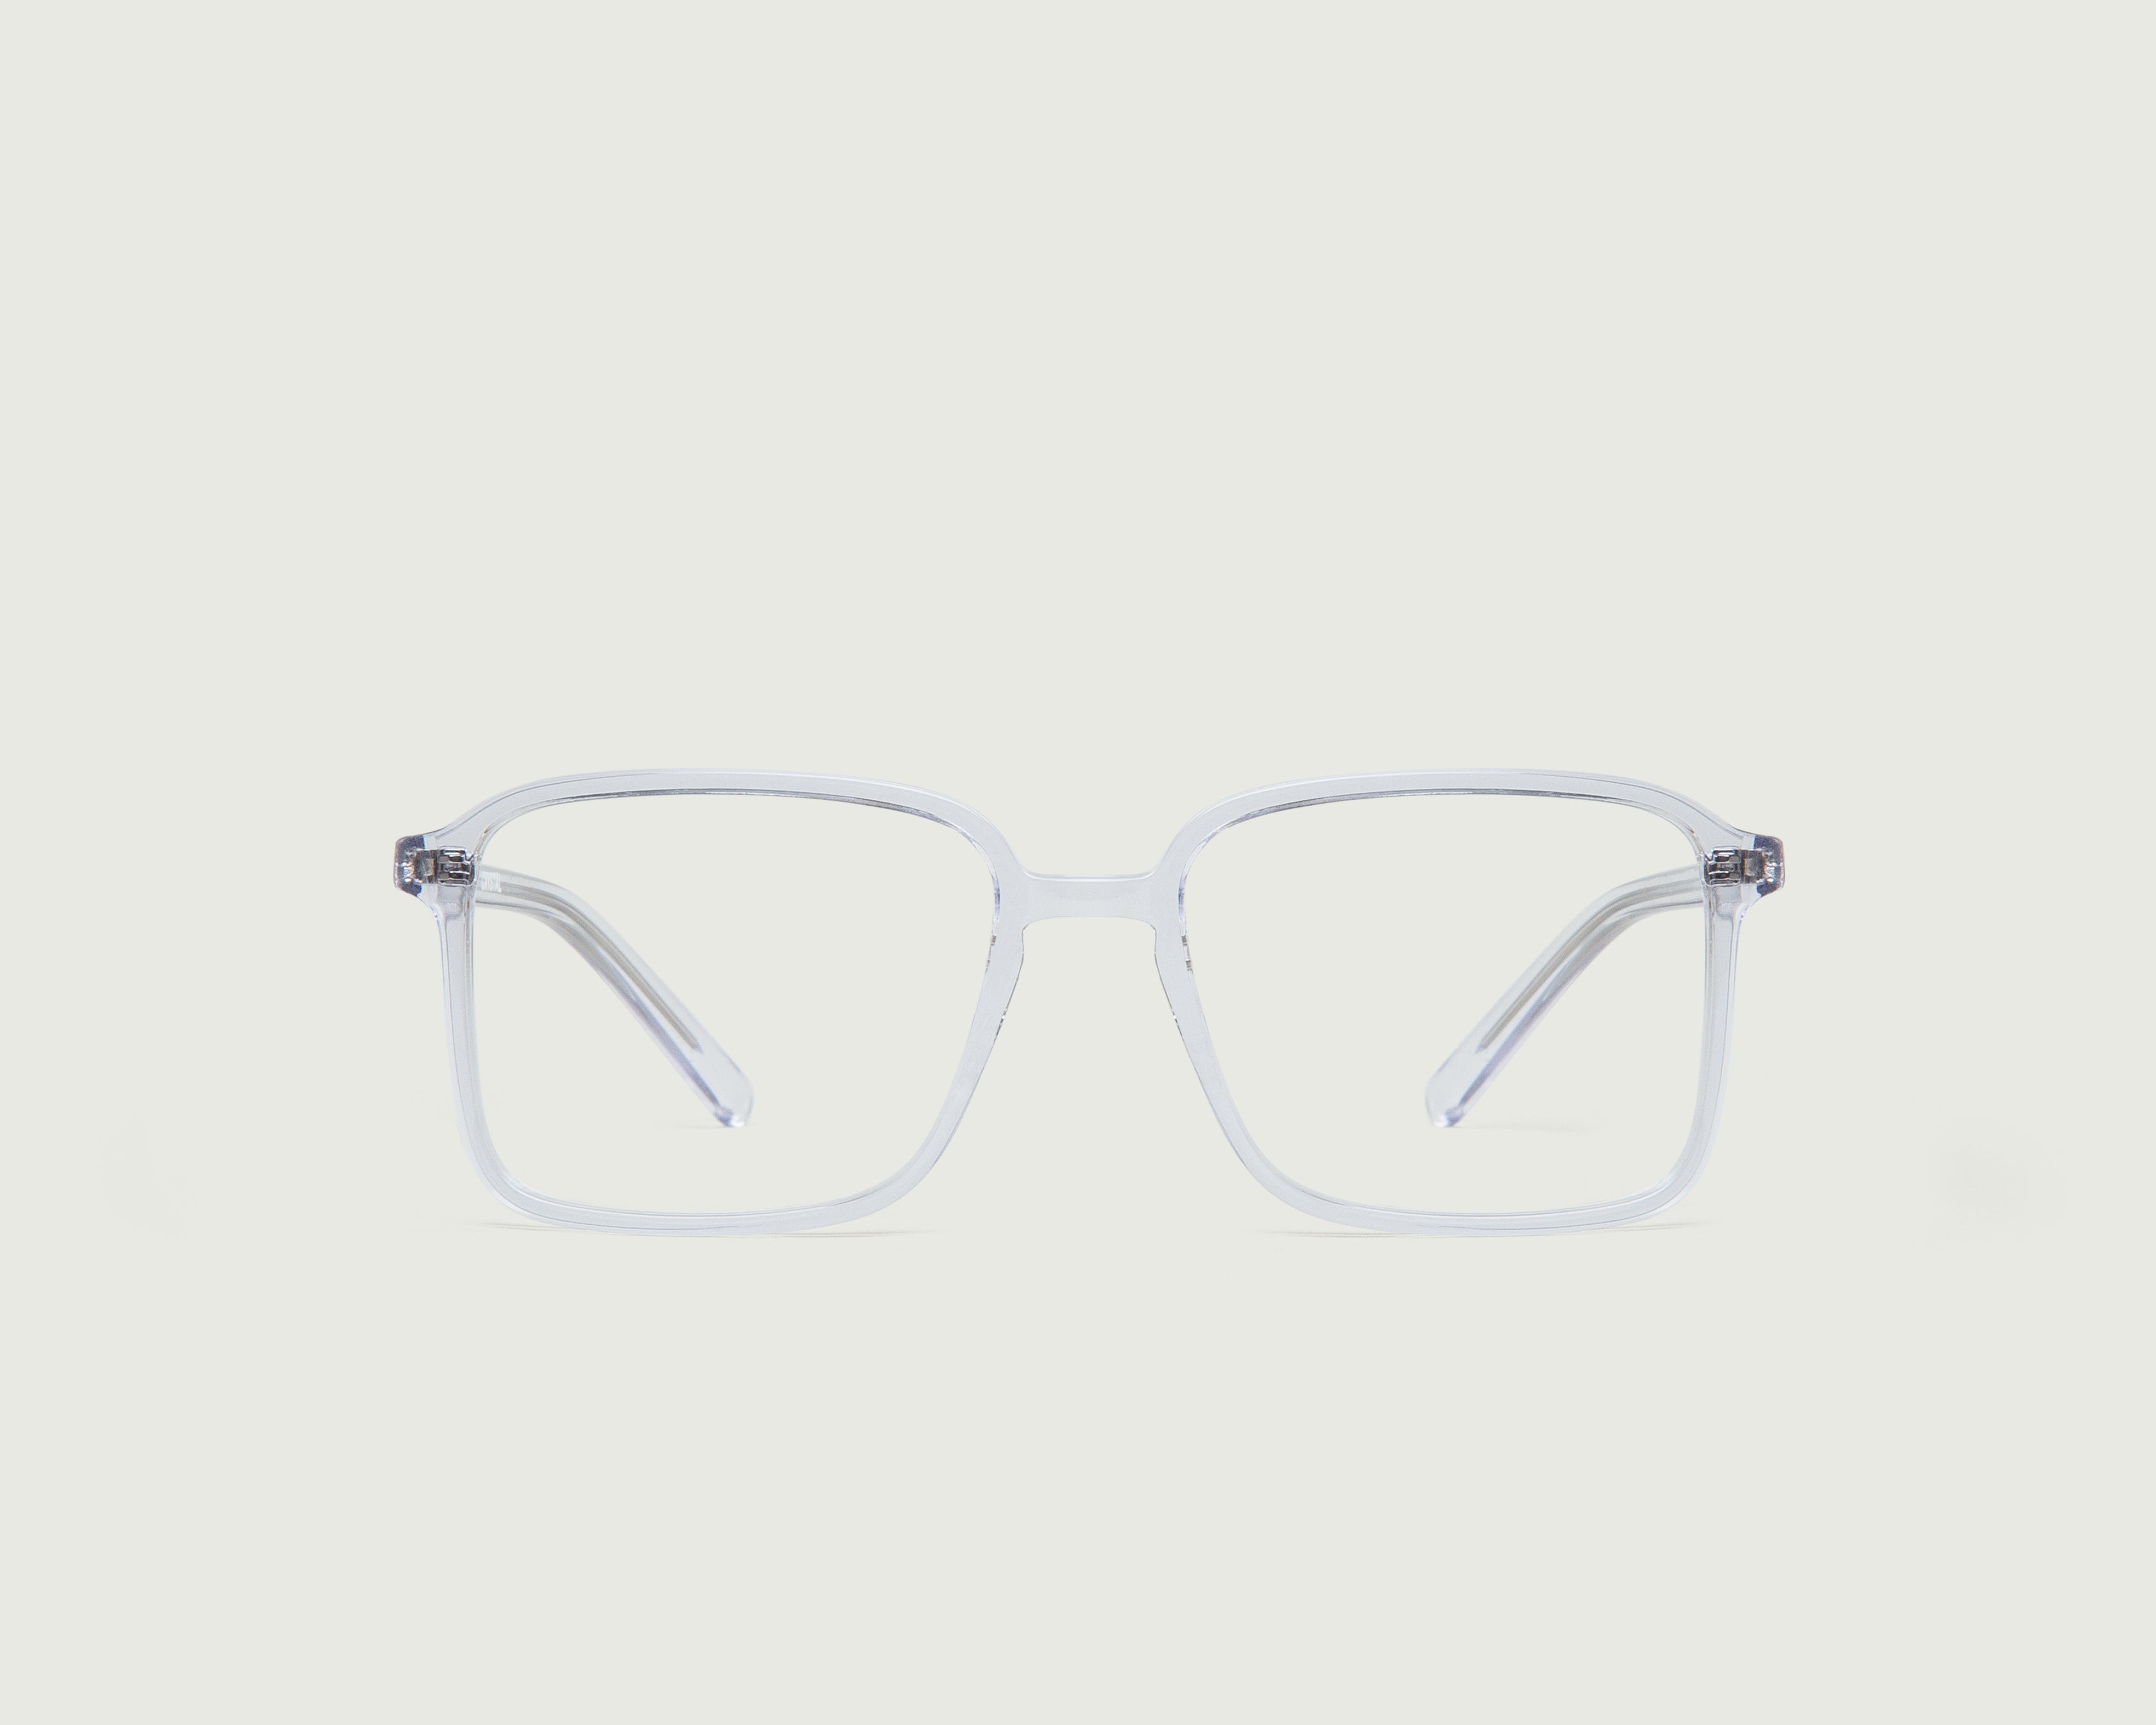 Crystal::Dex Eyeglasses square clear acetate front